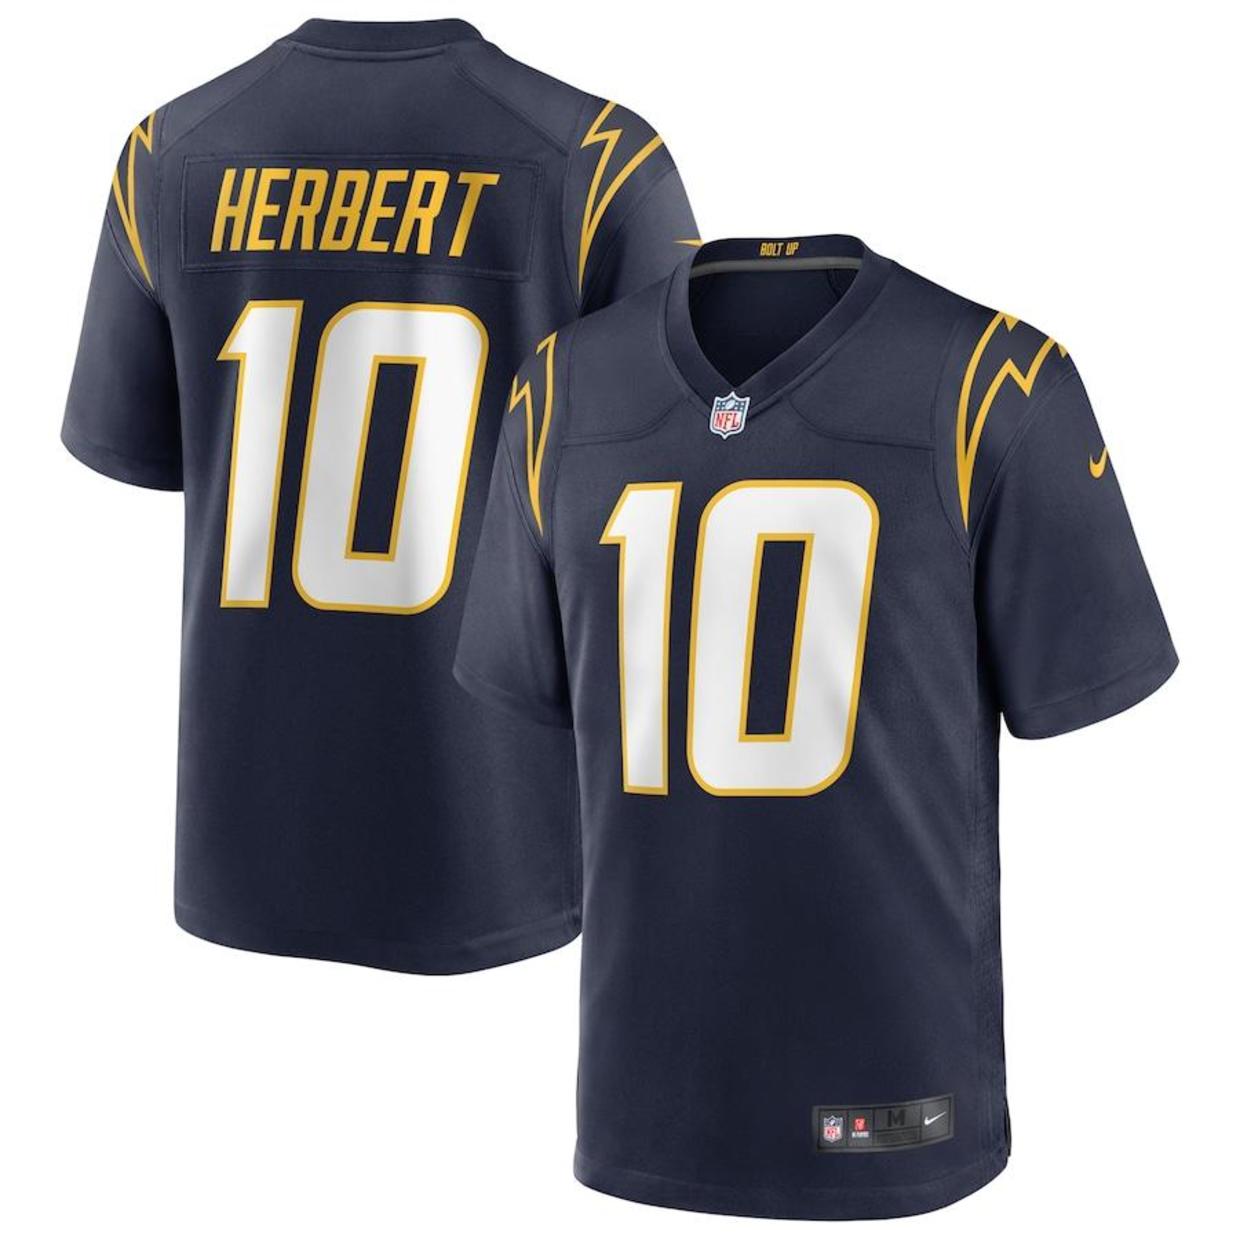 The top 10 NFL jerseys of 2022 The most popular football players of